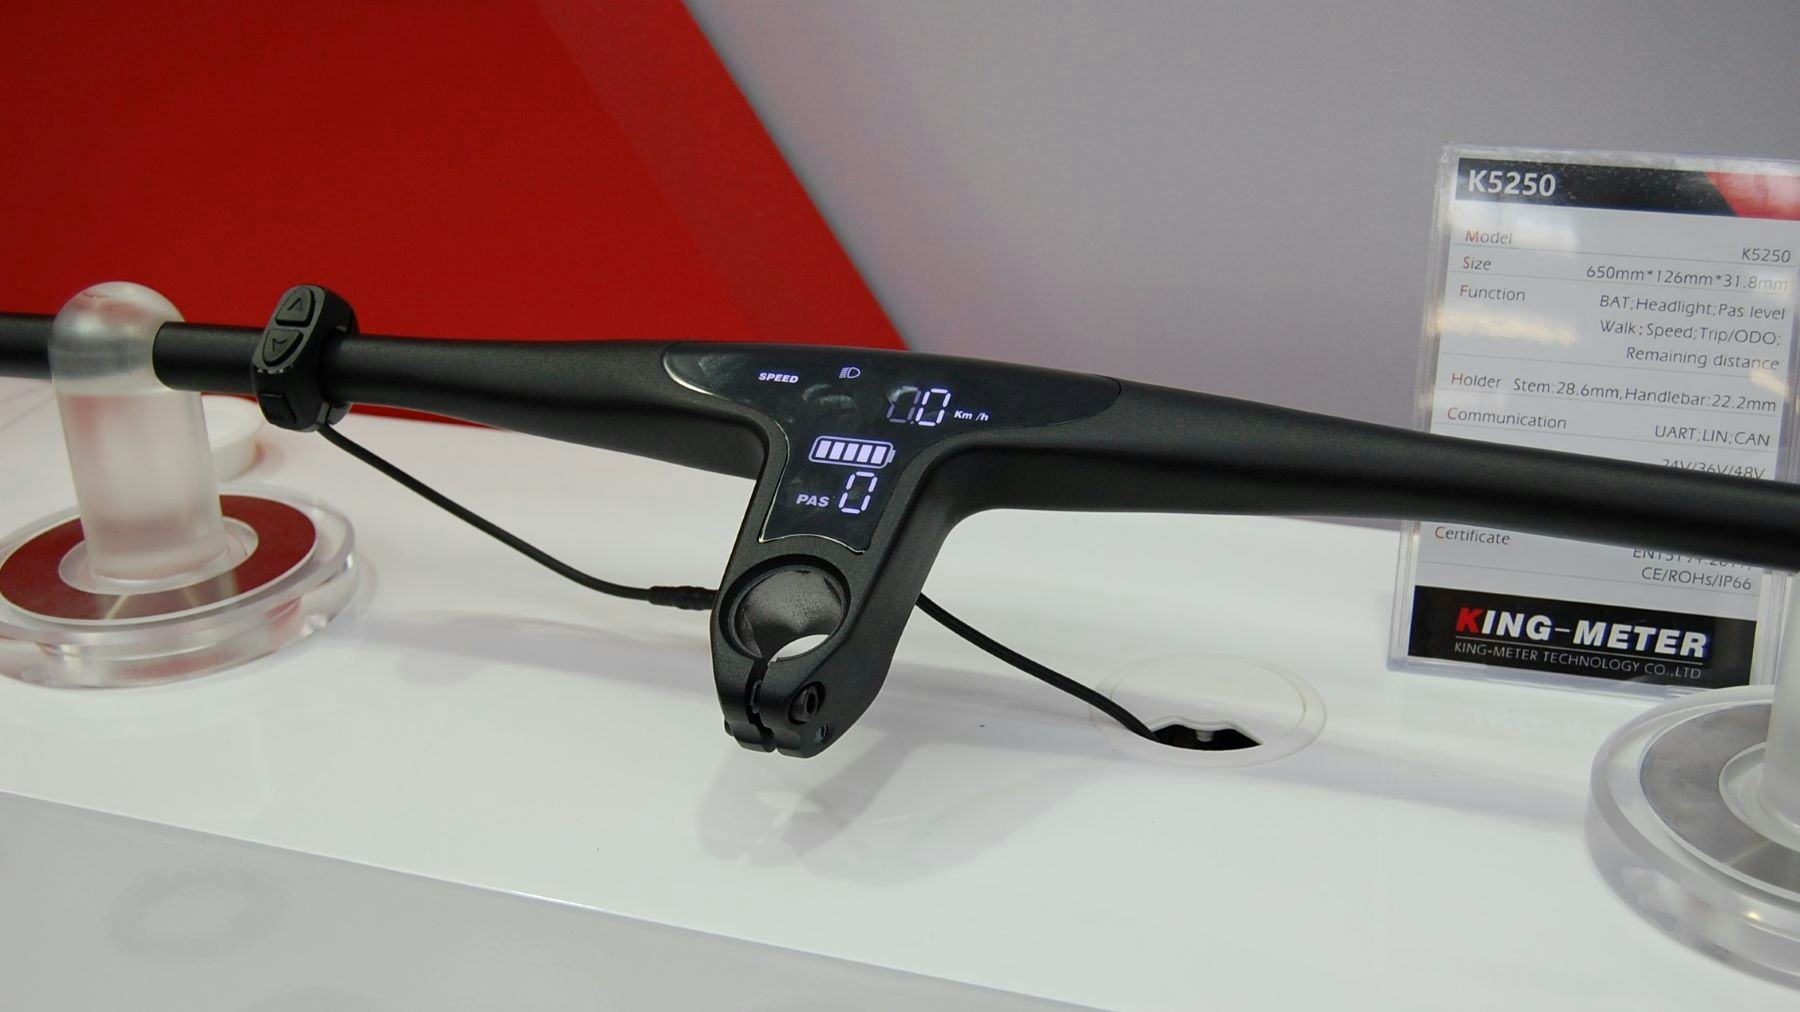 King-Meter was one of the first in the integrated display market, the K5250 as displayed at Eurobike  marks the company’s latest product. – Photo Bike Europe